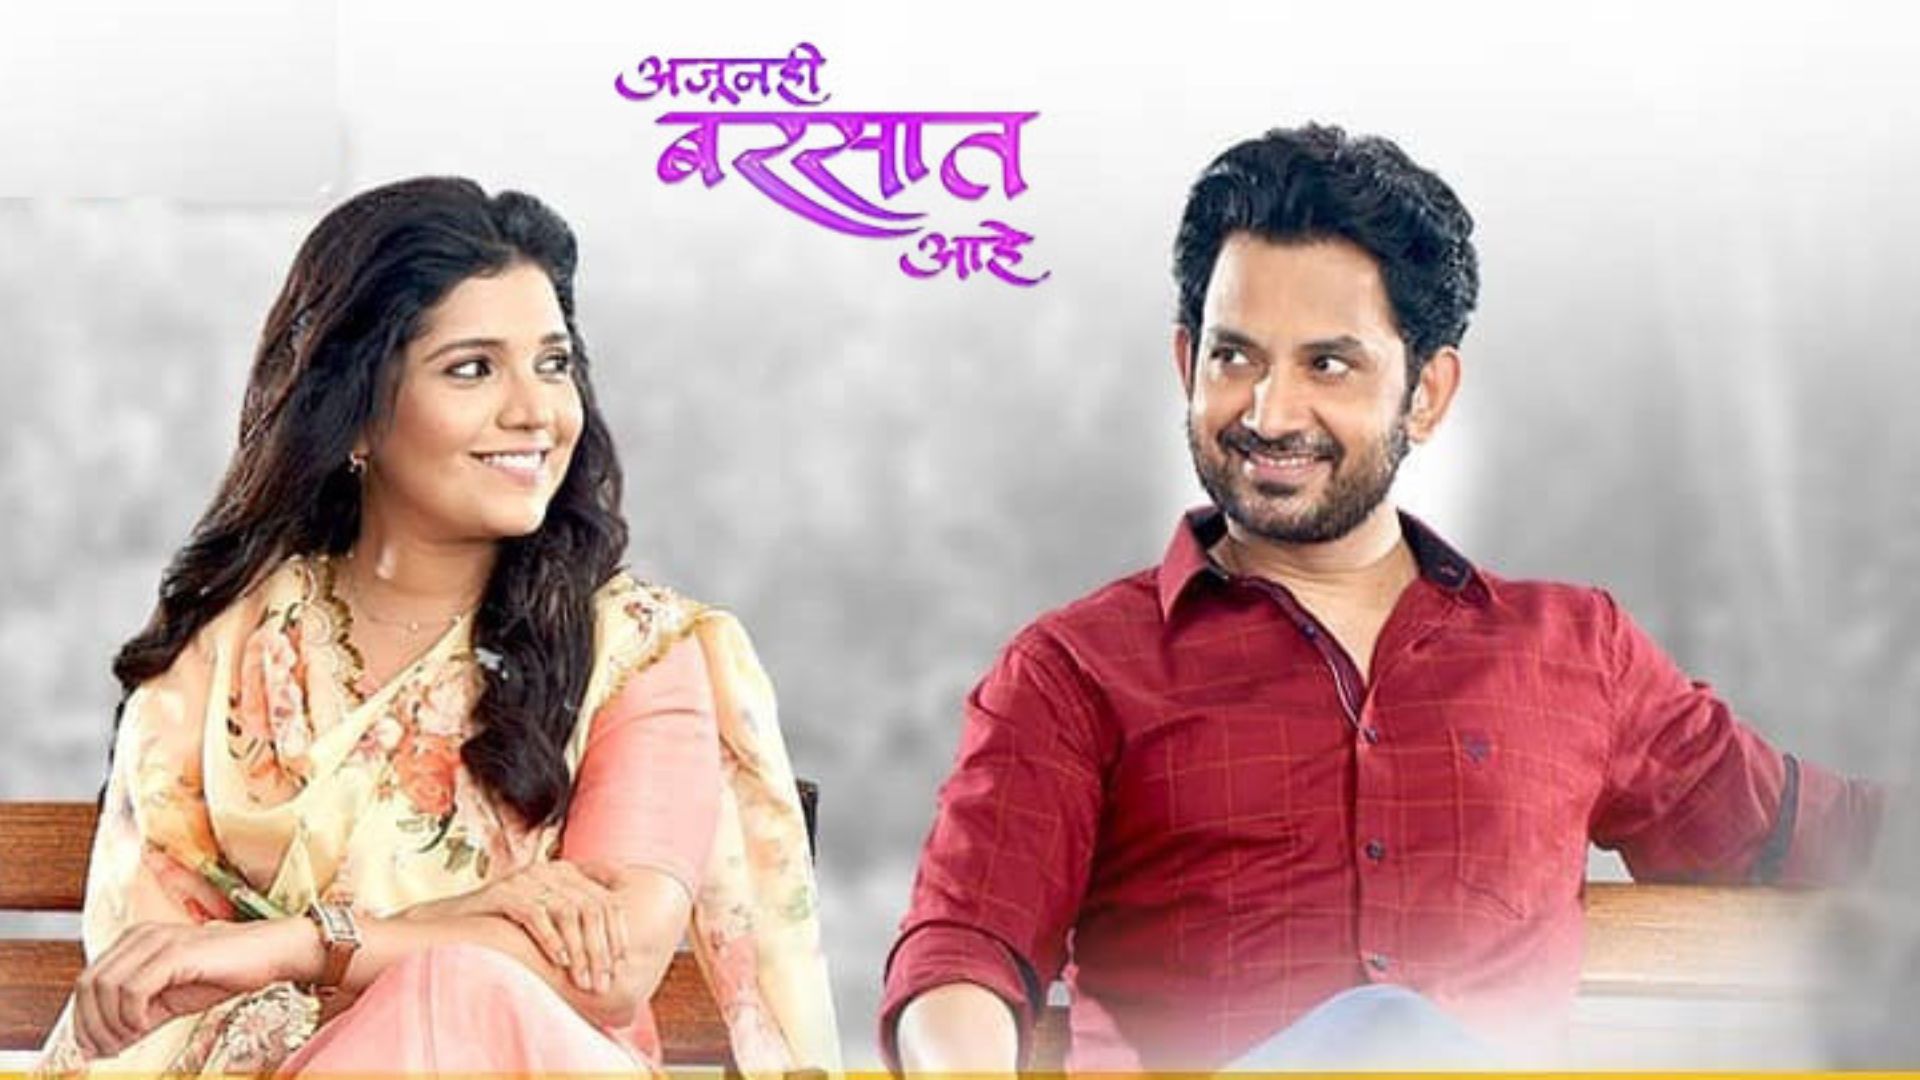 Ajunahi Barsat Aahe - An Indian Marathi Television Series That Aired On Sony Marathi